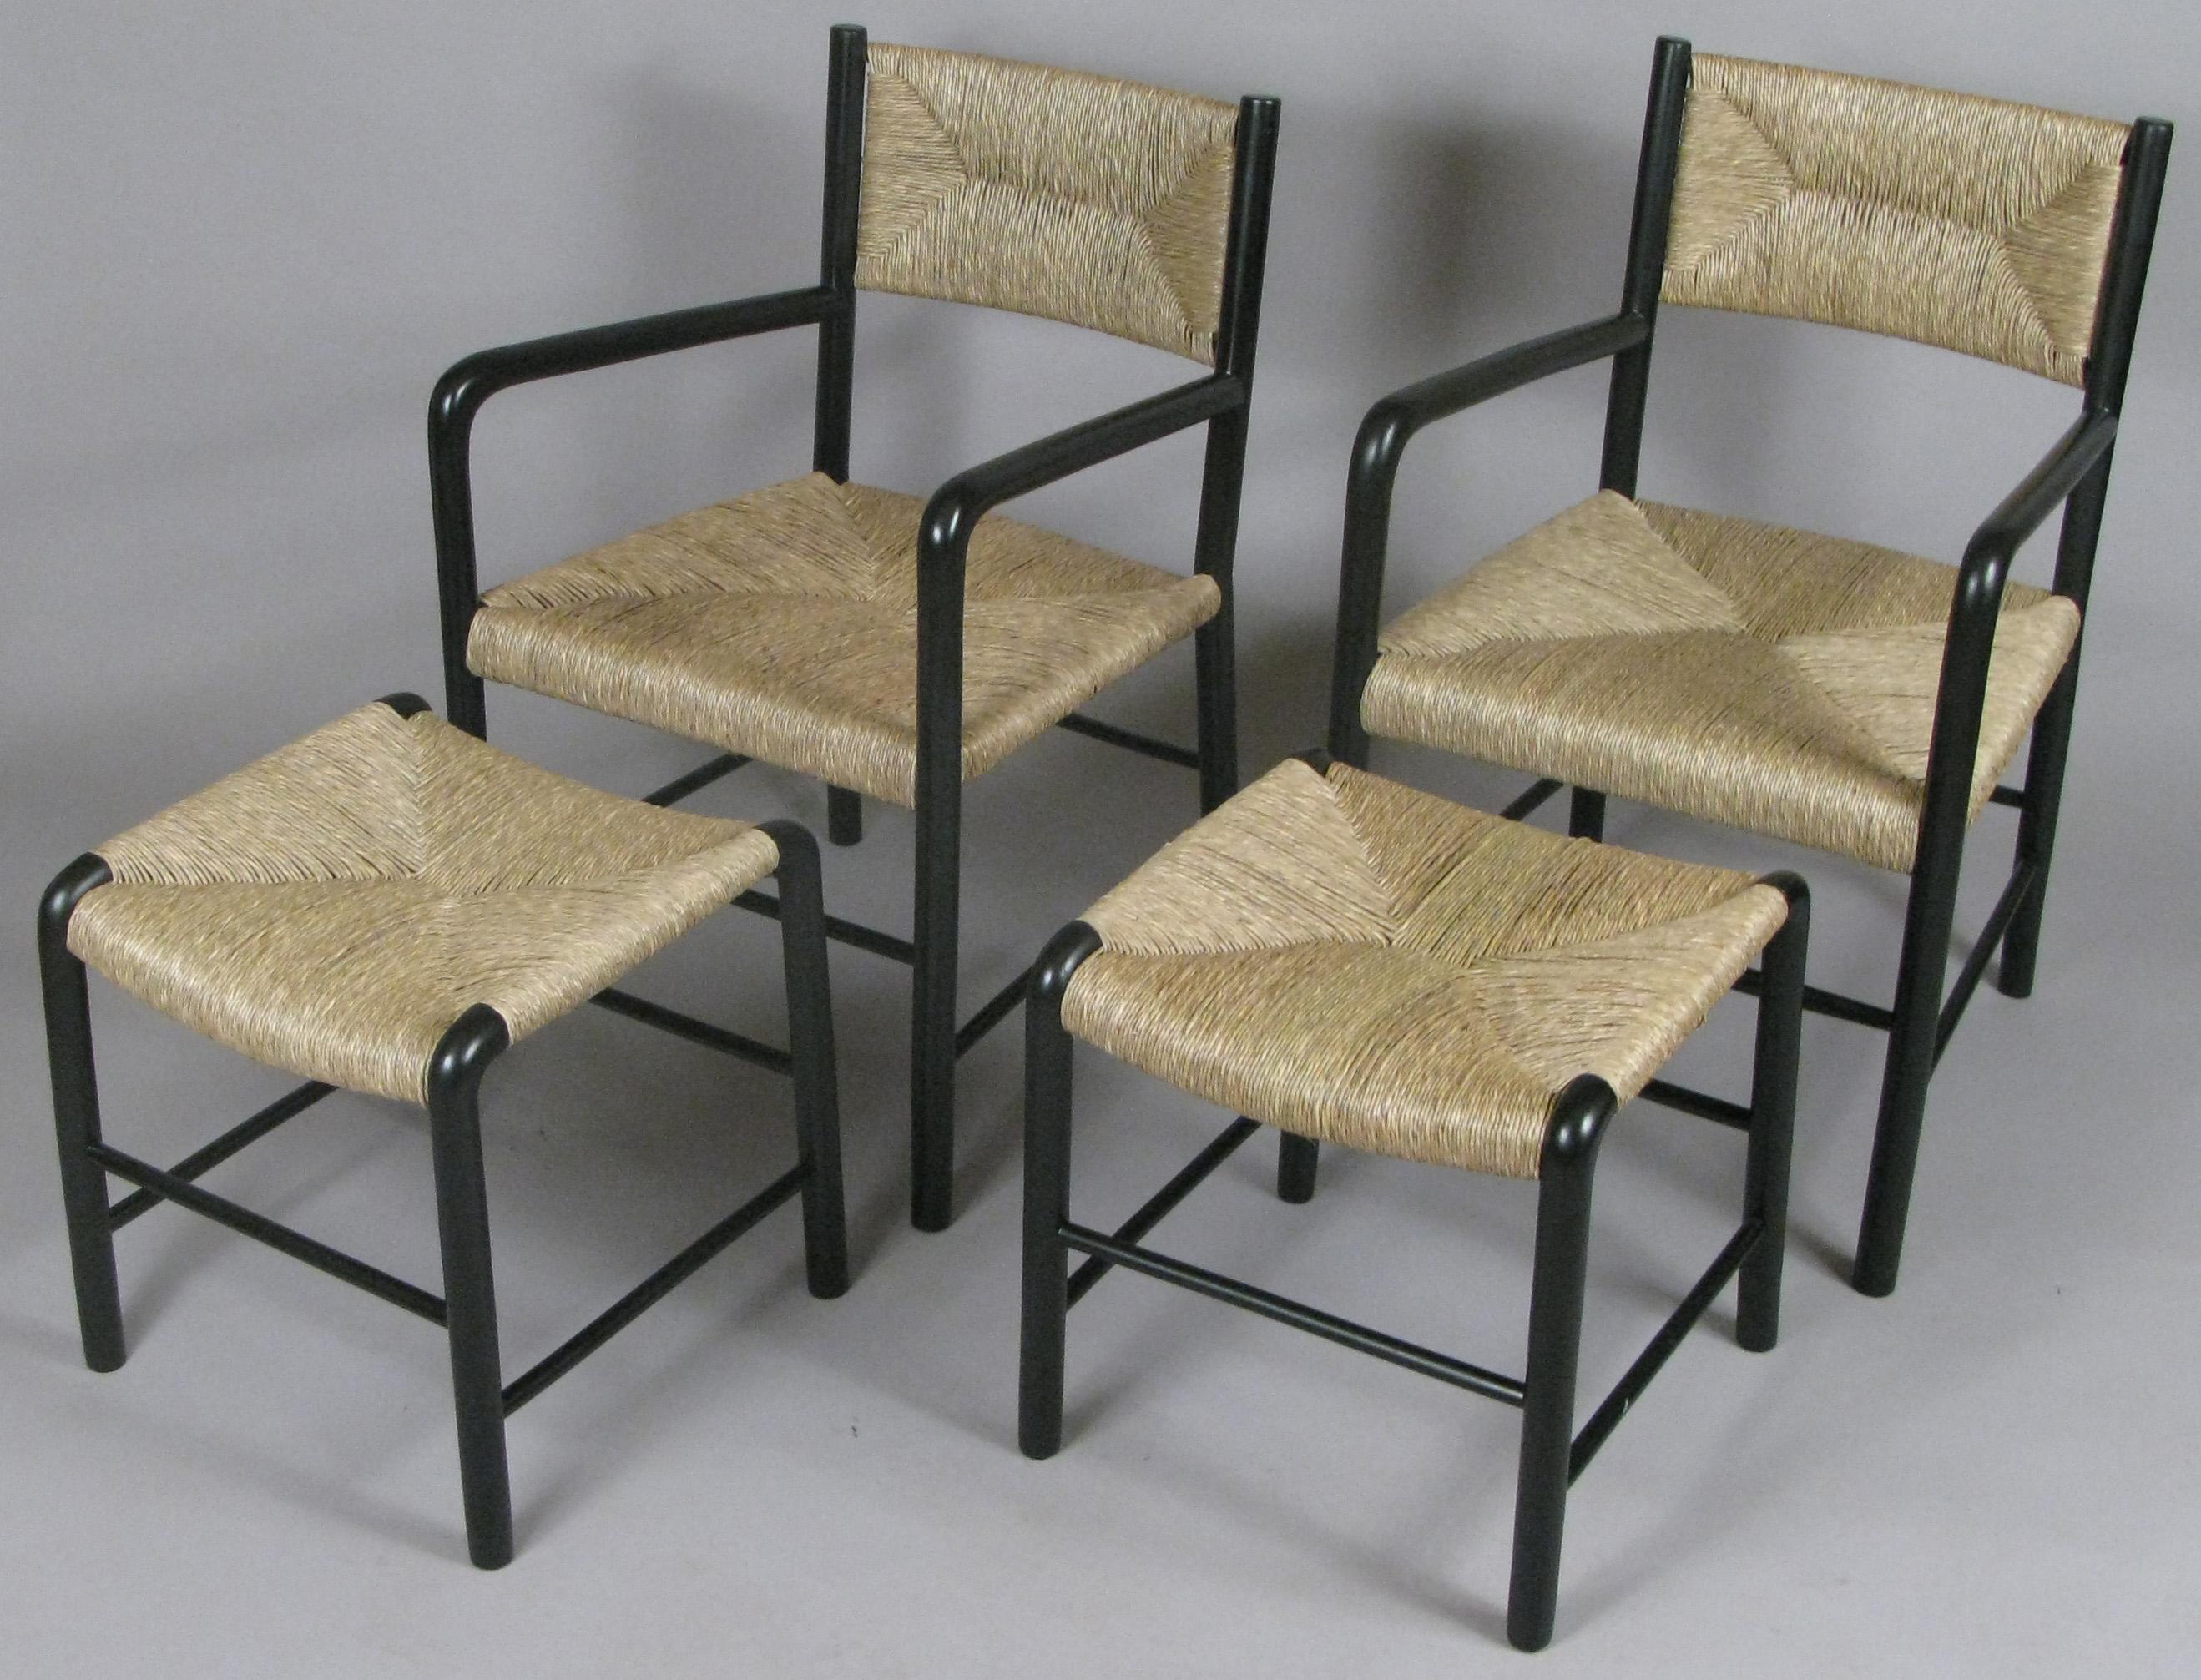 A beautiful matched pair of armchairs and their companion ottomans made in the 1930s in Italy. Not certain of the maker, but another set of these chairs were placed in an interior designed by Studio BBPR in Italy in the 1930s. The frames have been